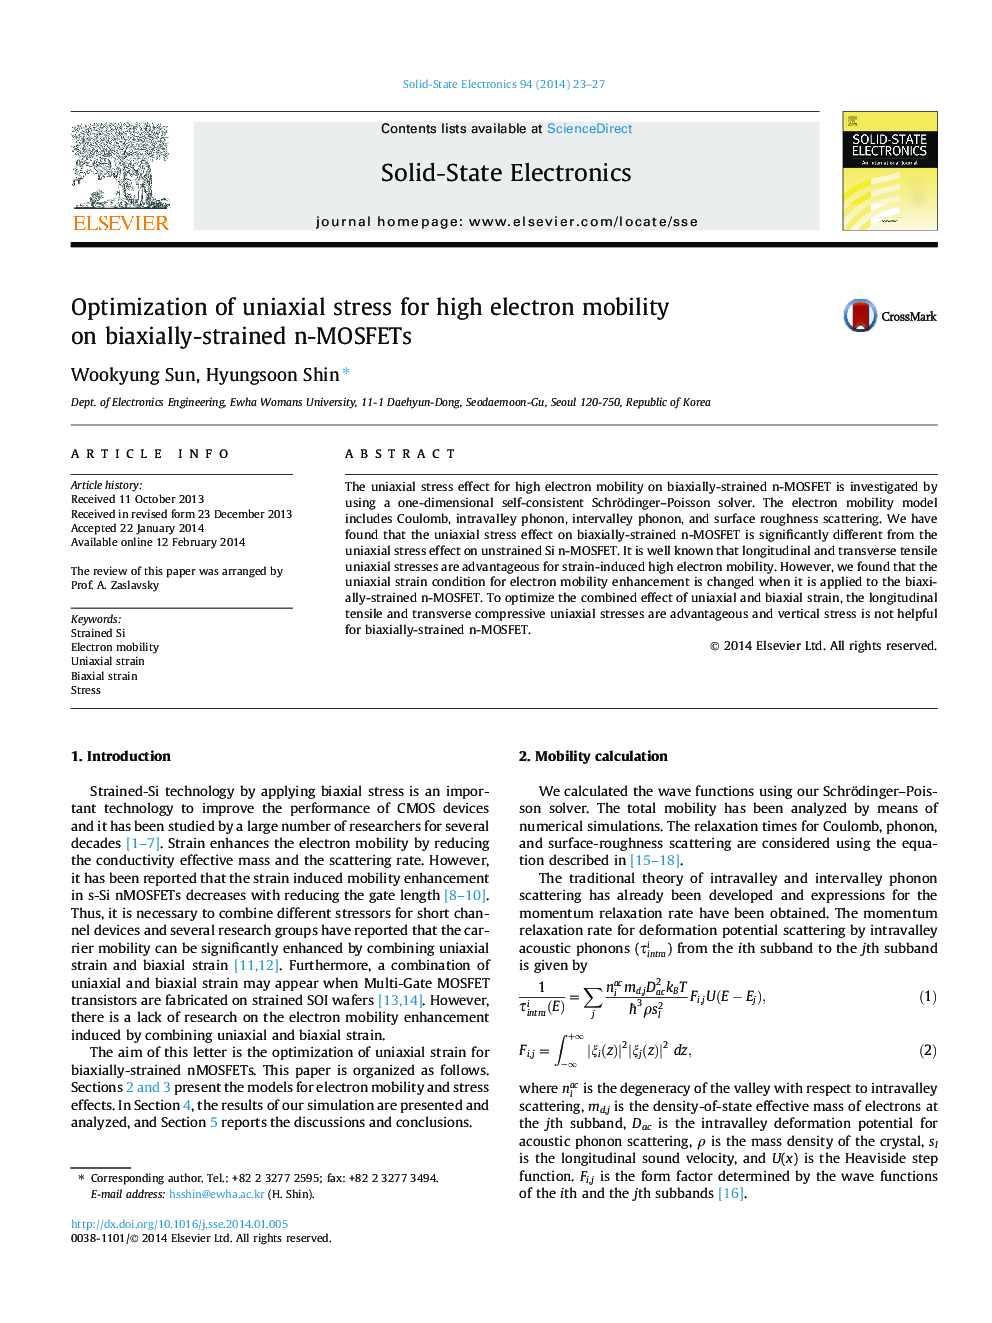 Optimization of uniaxial stress for high electron mobility on biaxially-strained n-MOSFETs